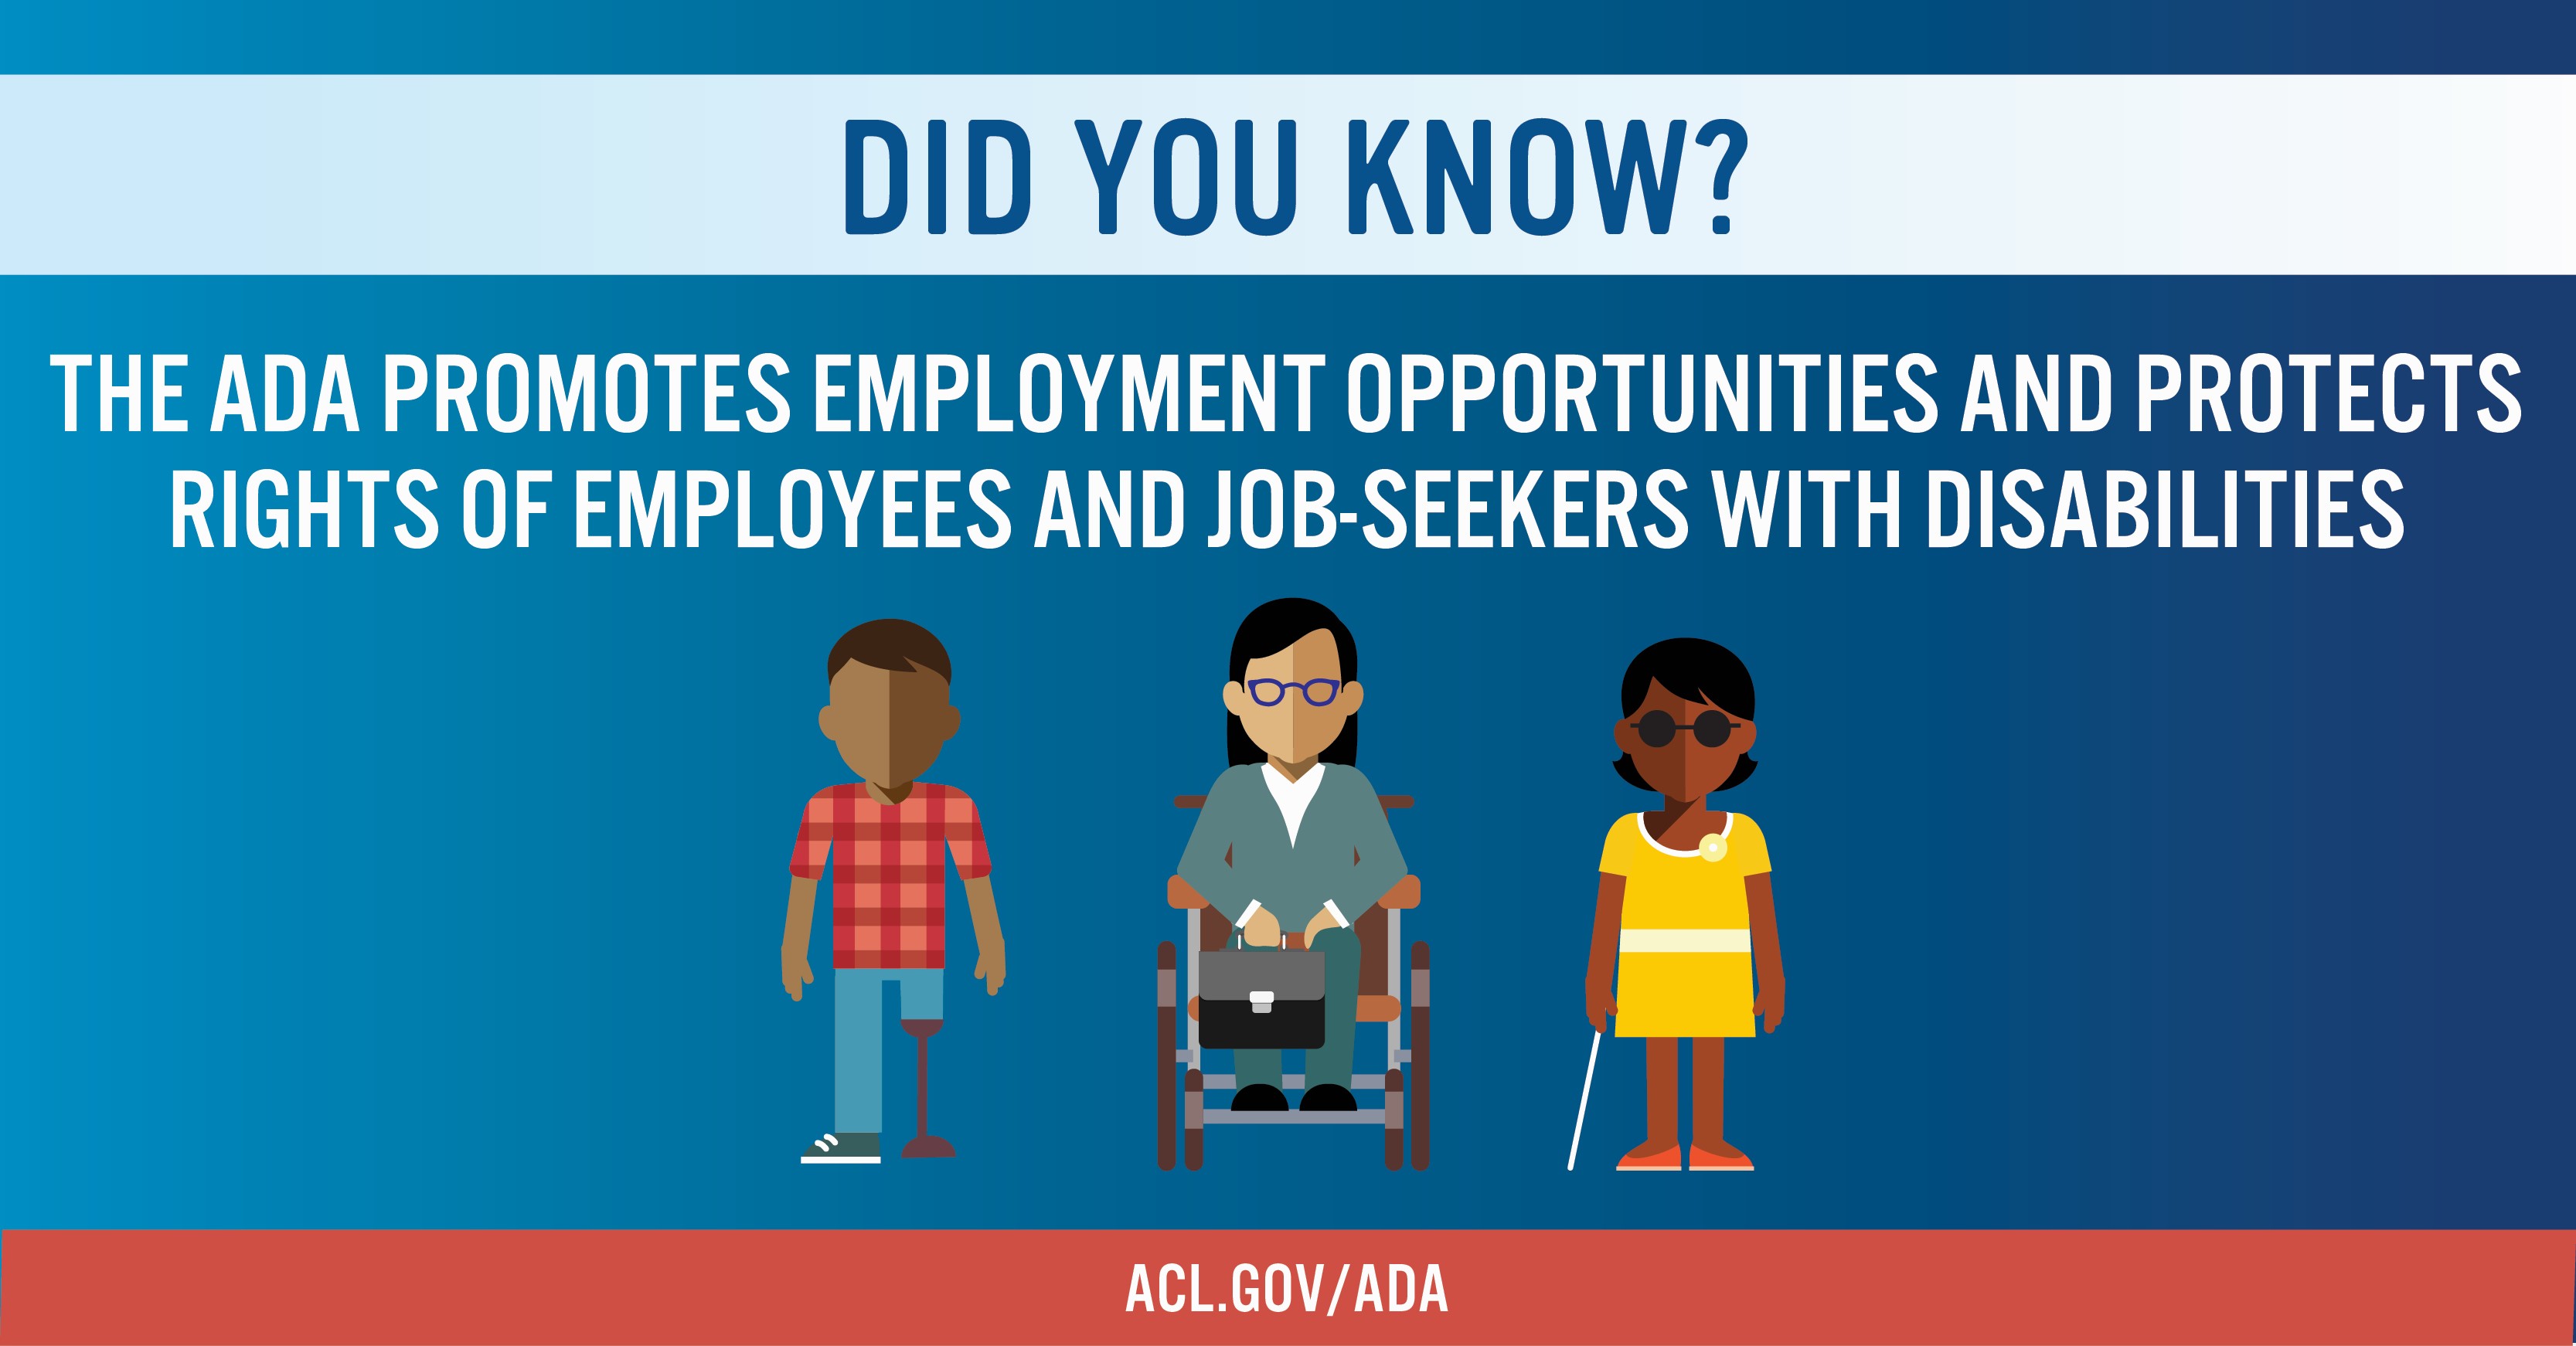 The ADA promotes employment opportunities and protects rights of employees and job seekers with disabilities